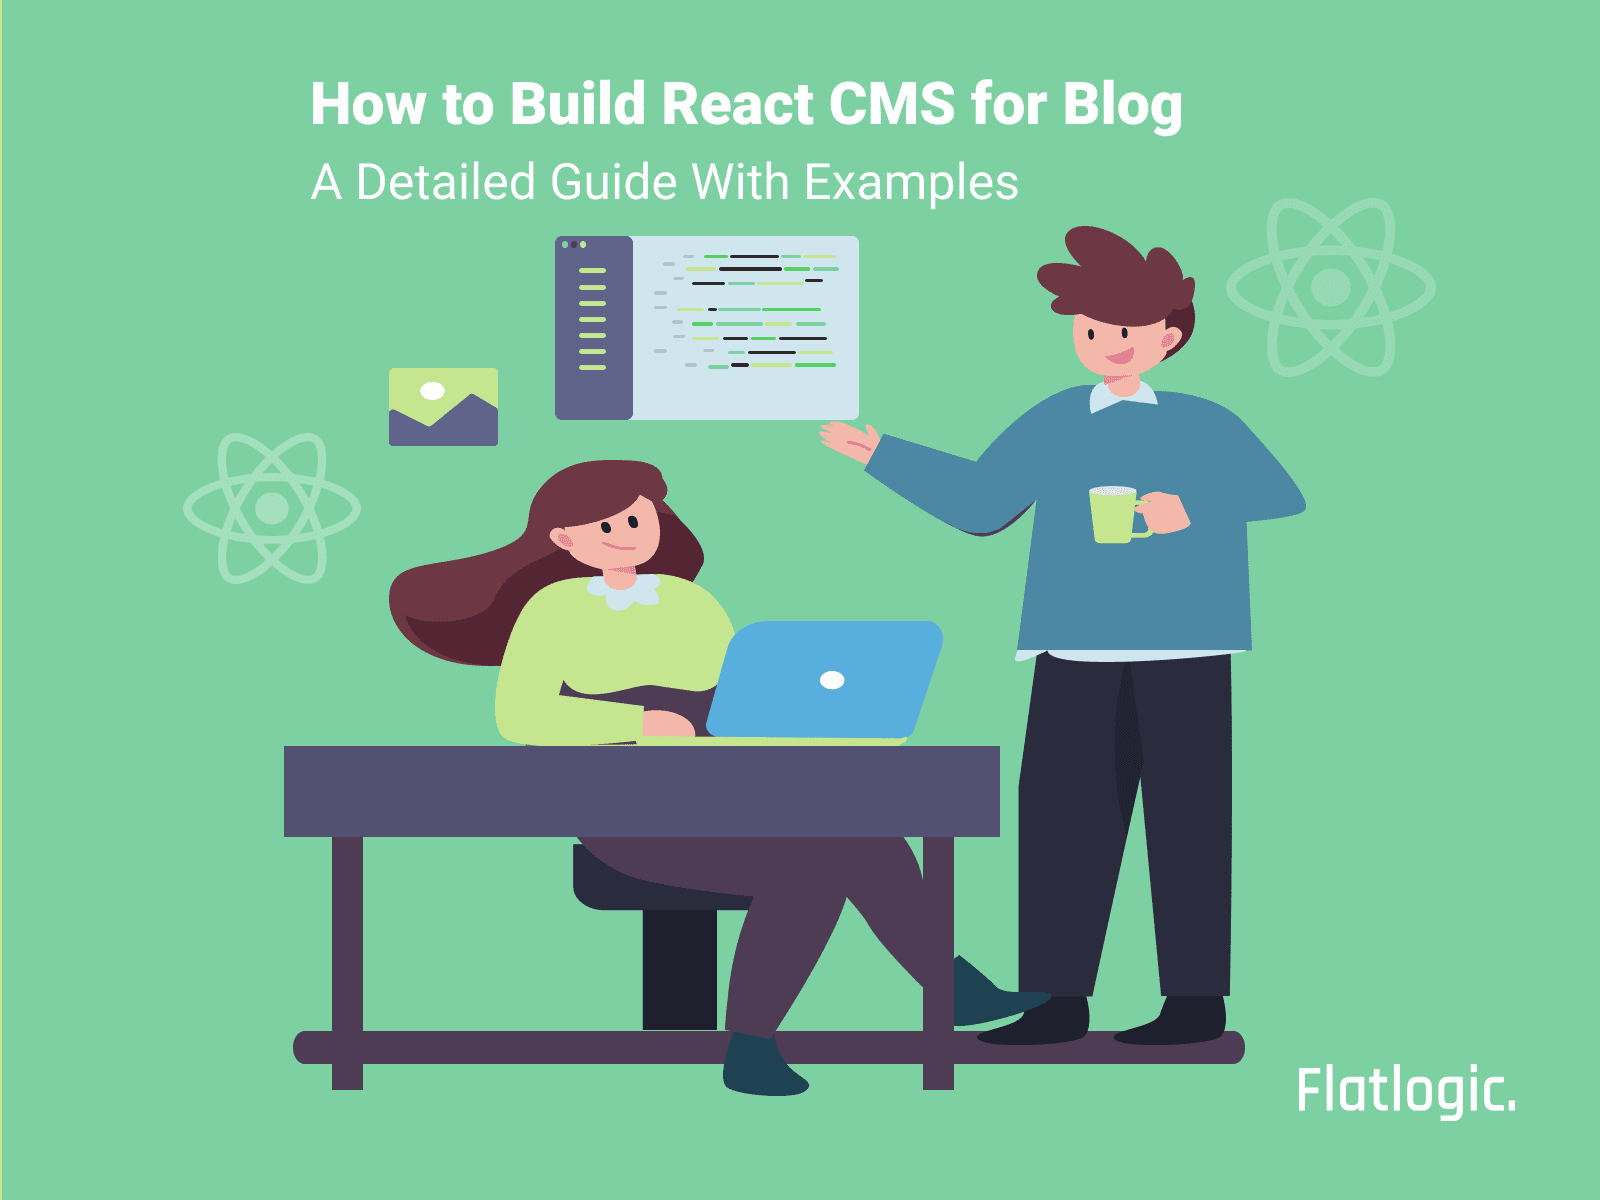 How to Build React CMS for Blog [Step-by-Step Guide]